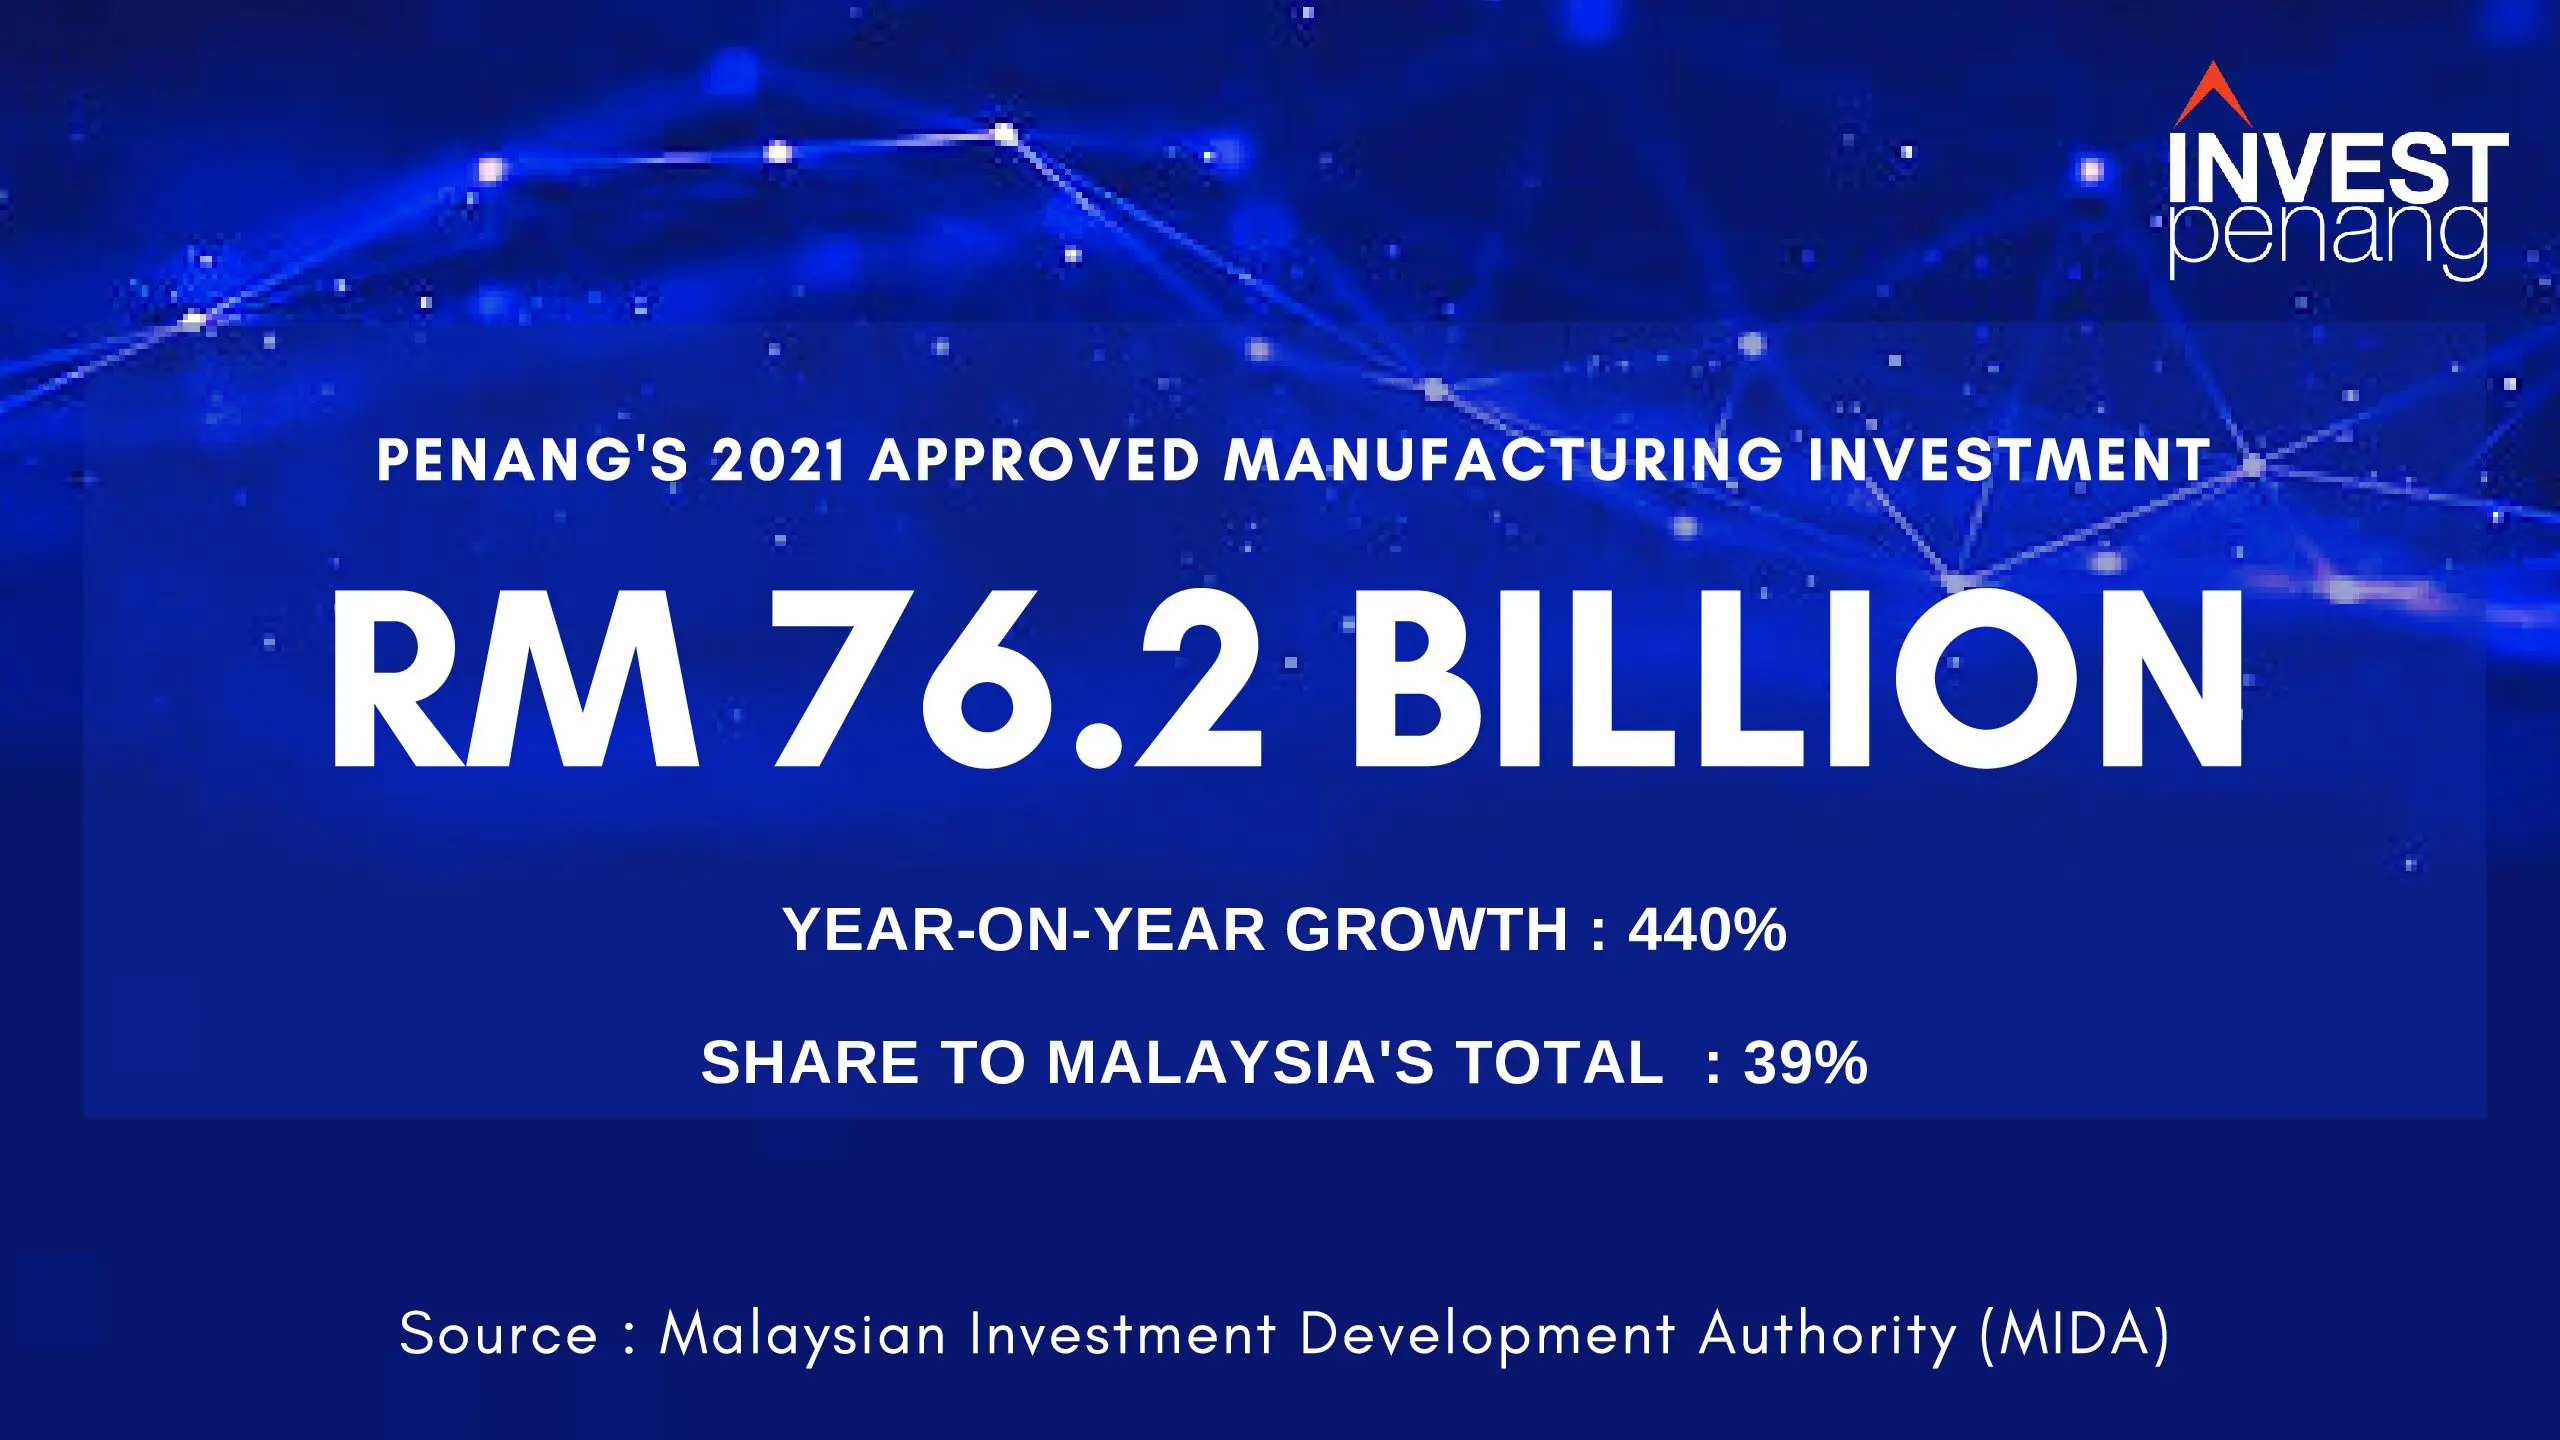 [Press Release] Penang’s 2021 Approved Manufacturing Investments Hit All-Time High of RM76.2 Billion